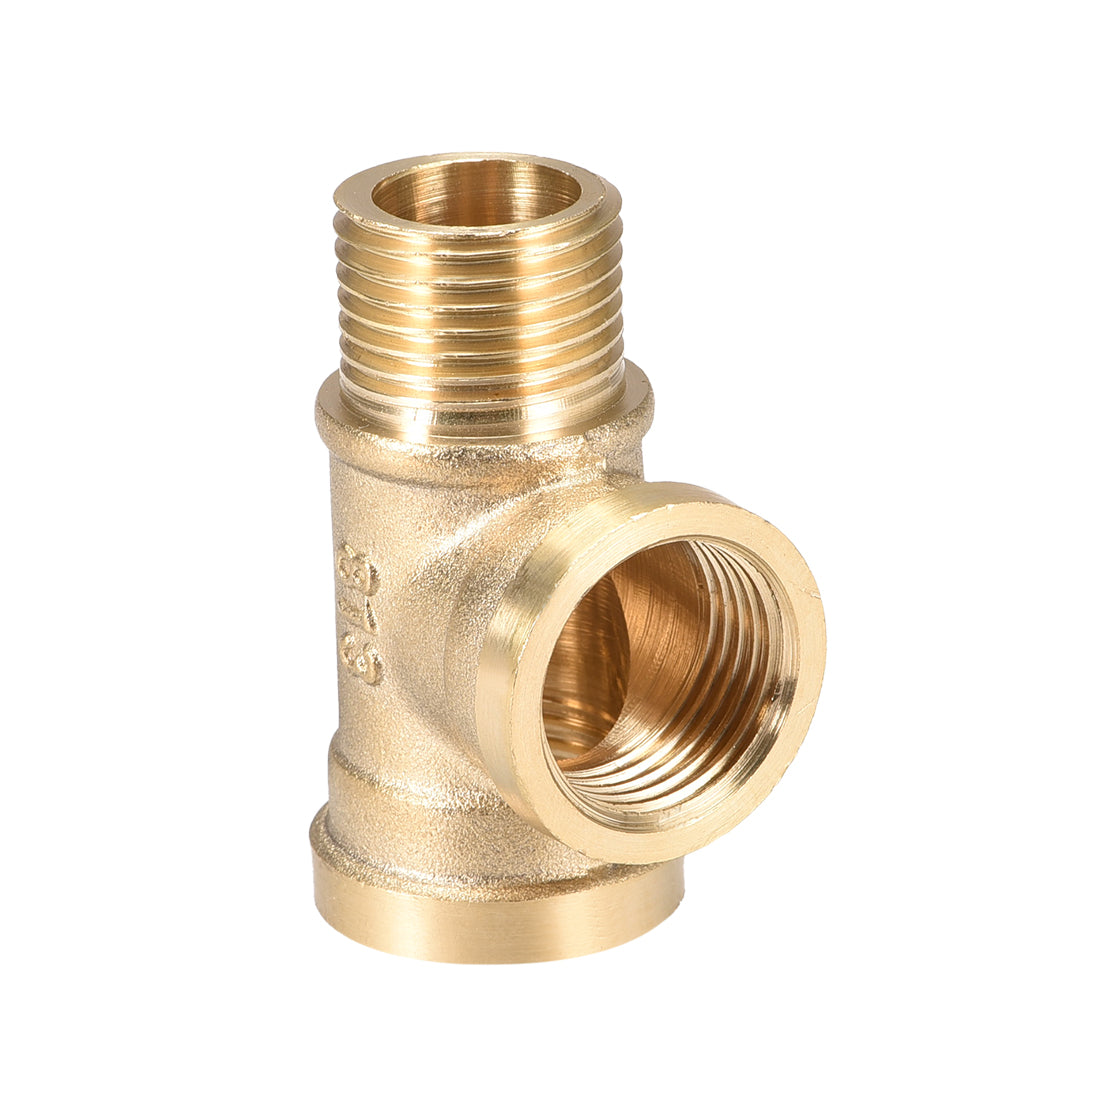 uxcell Uxcell Brass Tee Pipe Fitting G1/2 Male x G1/2 Female x G1/2 Female T Shaped Connector Coupler